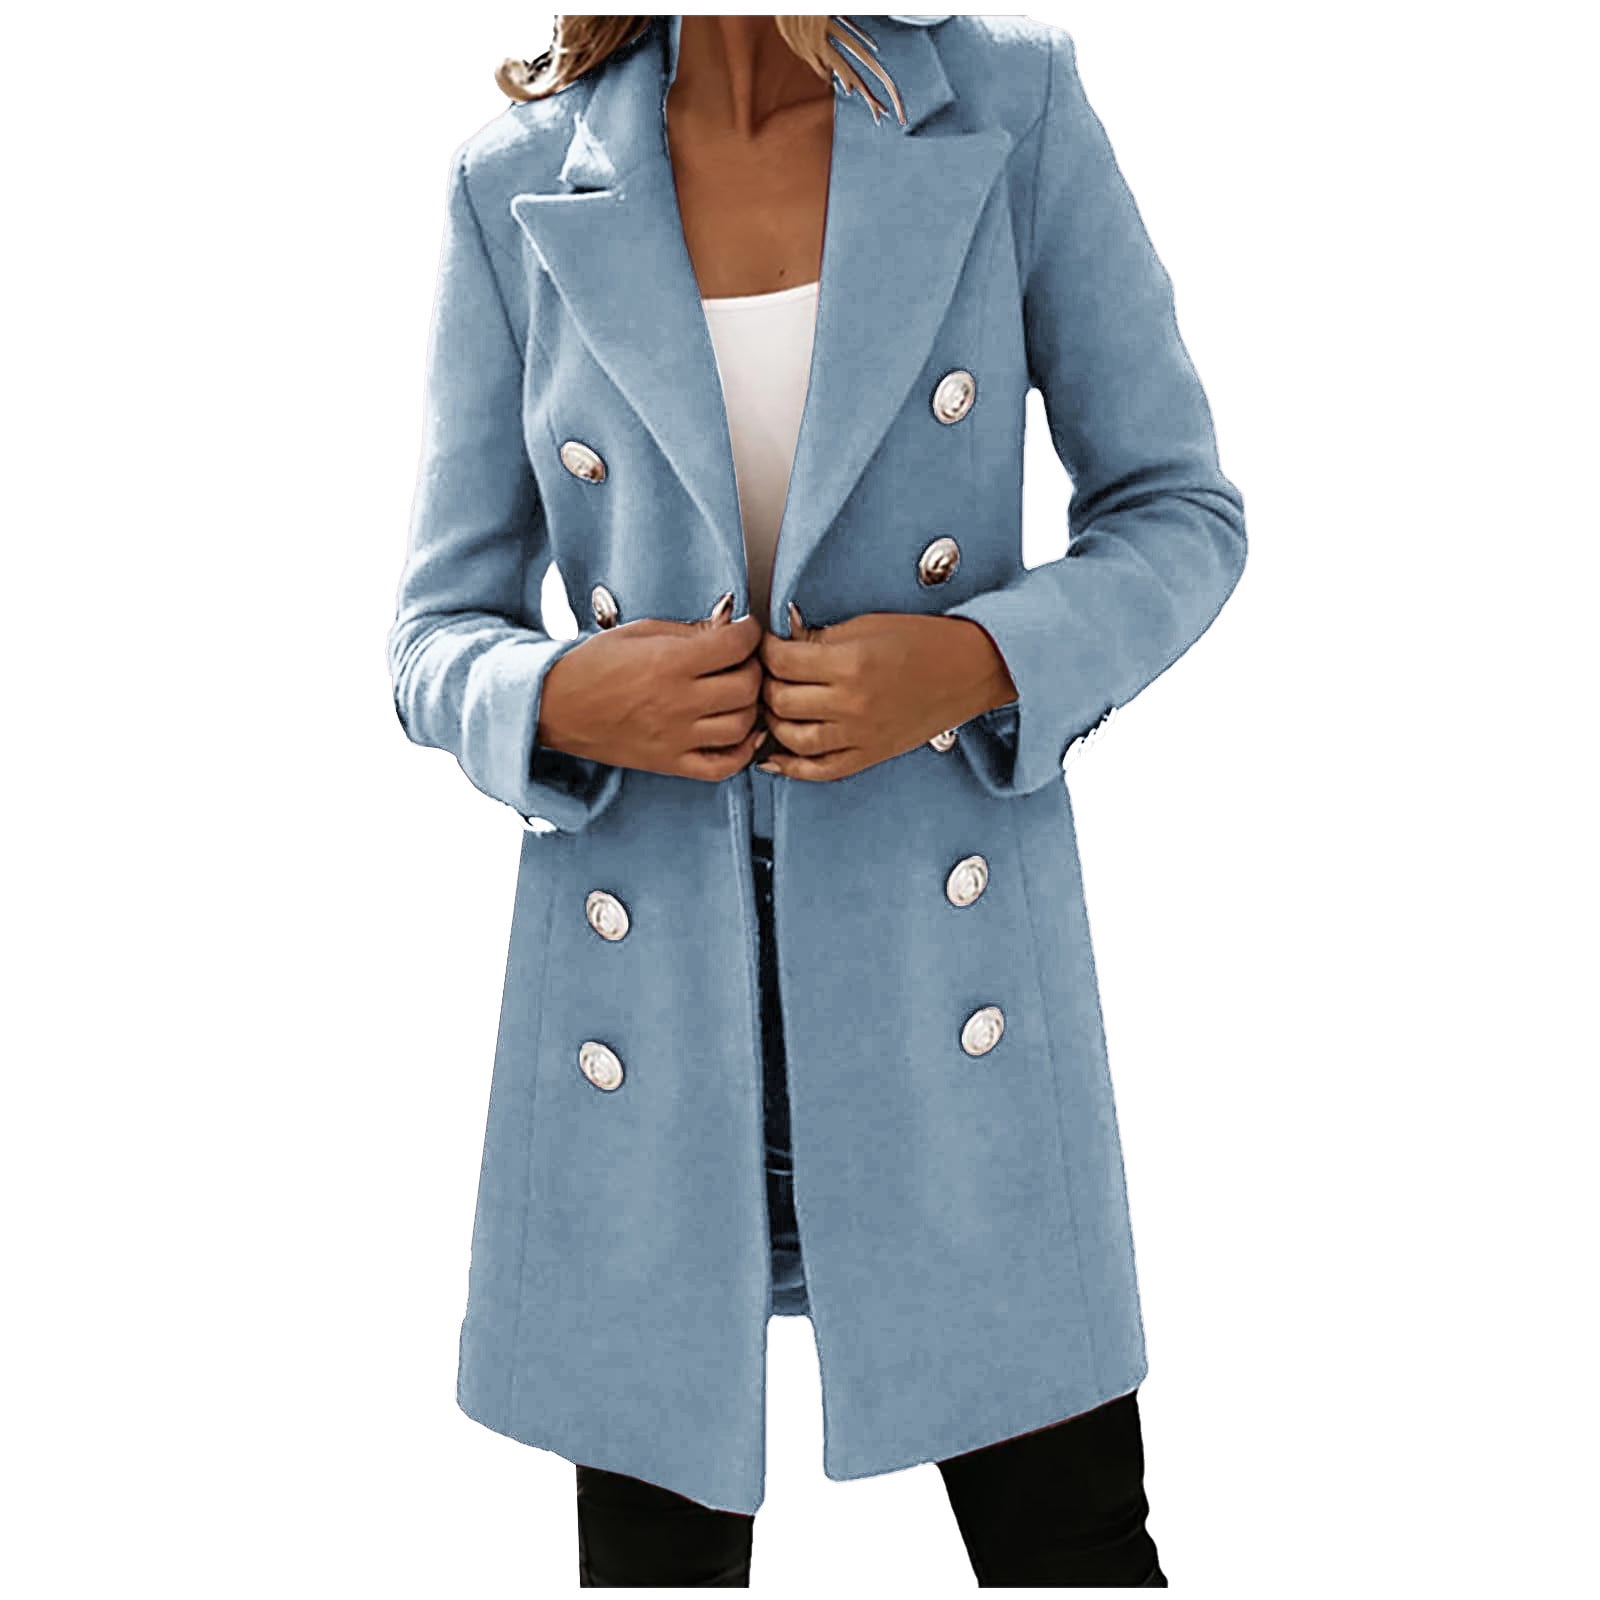 Hfyihgf Plus Size Womens Winter Double Breasted Peacoat Long